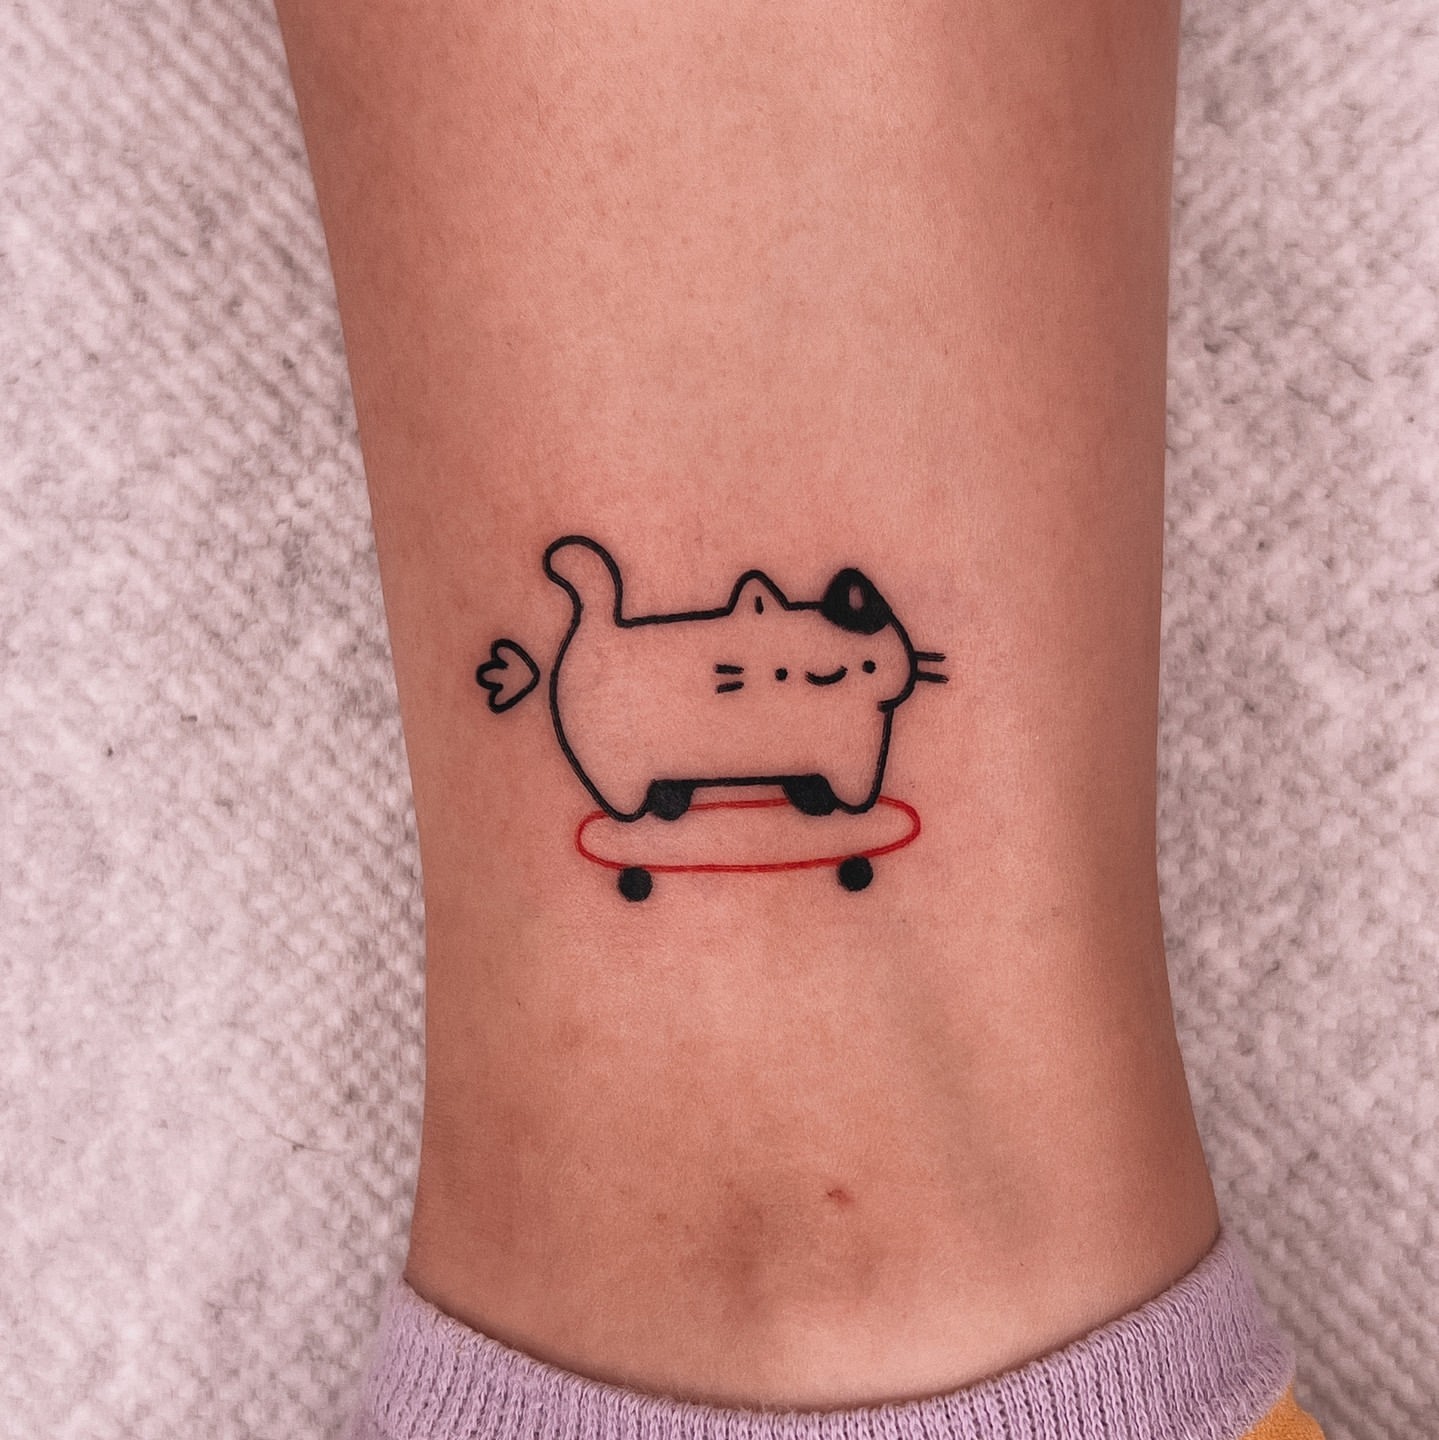 Top Minimal And Small Cat Tattoos You'll Want To See | Inku Paw